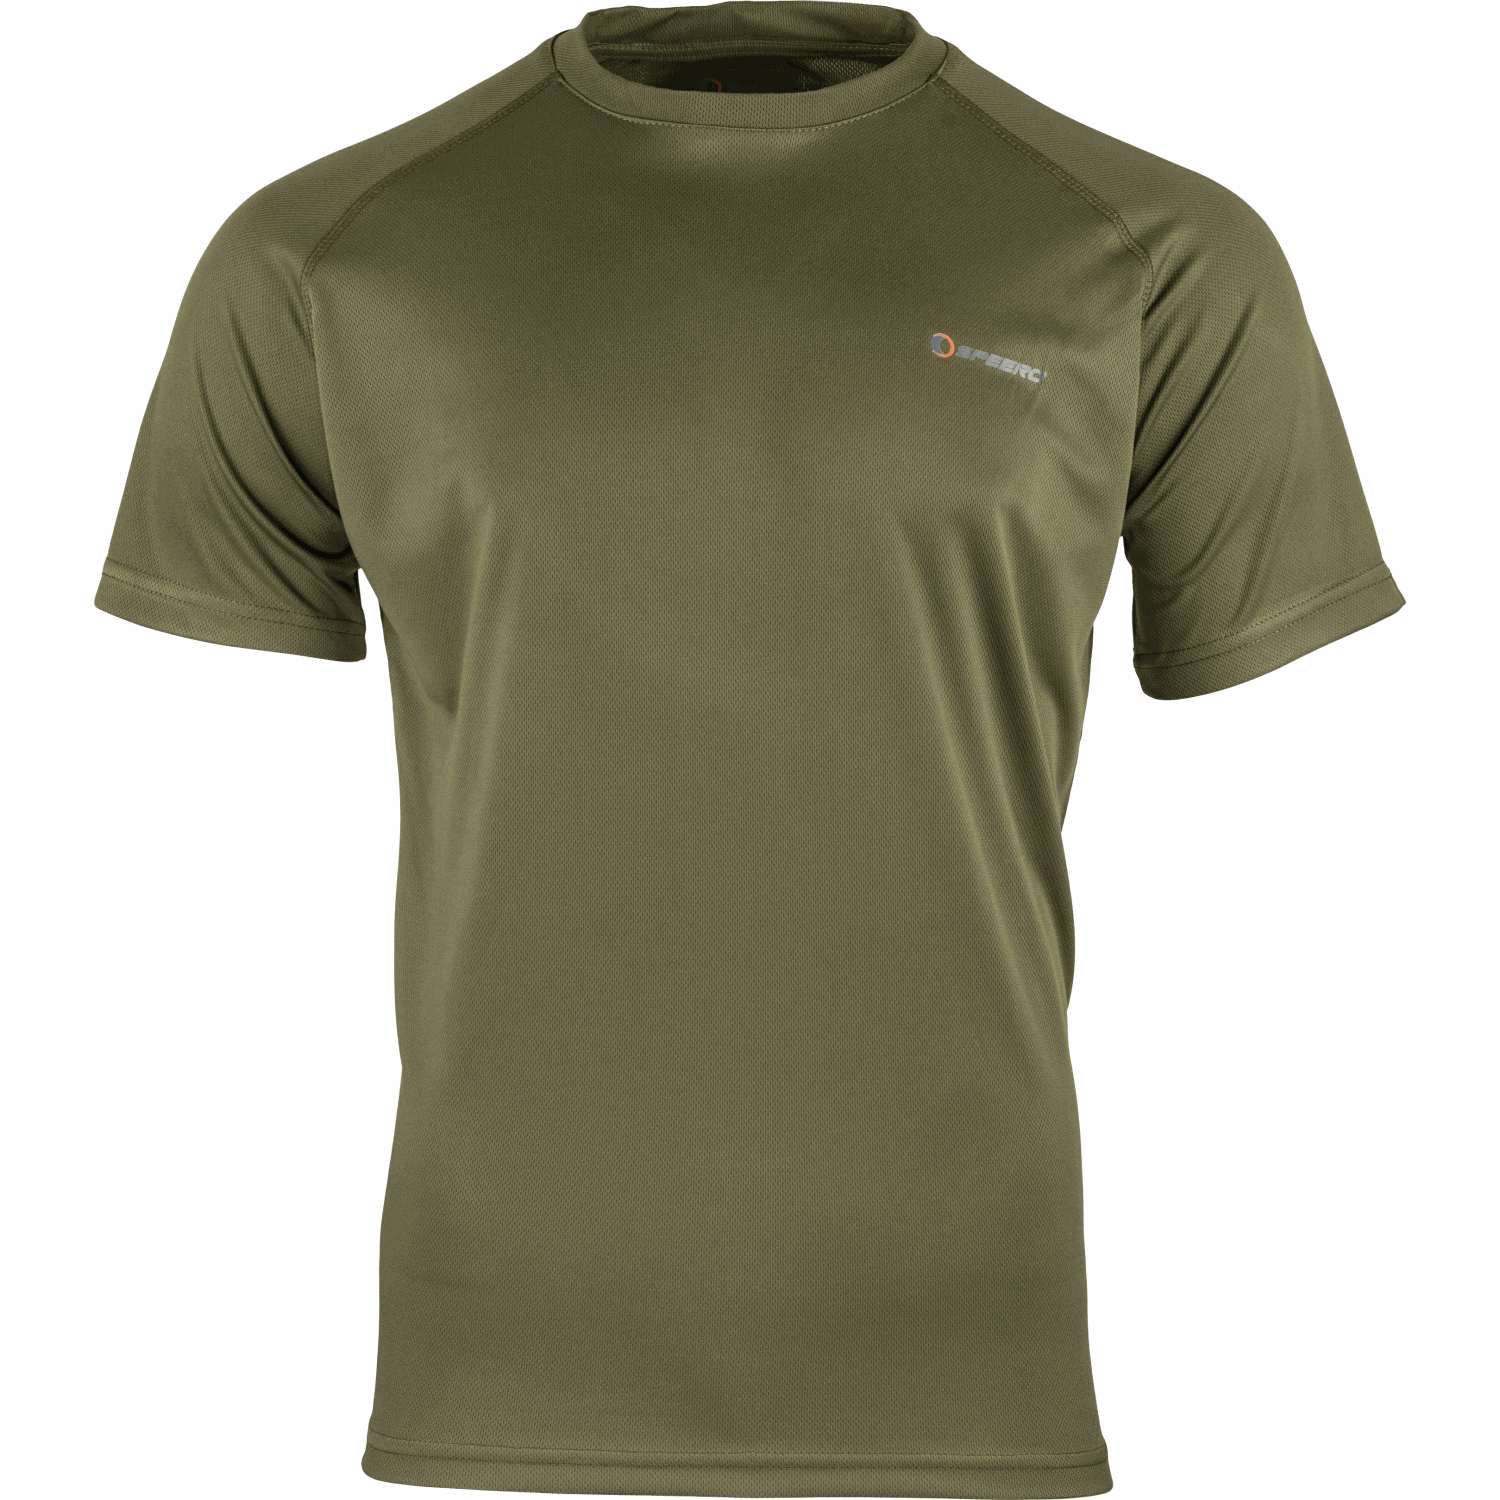 Speero Tackle T-Shirt in Green